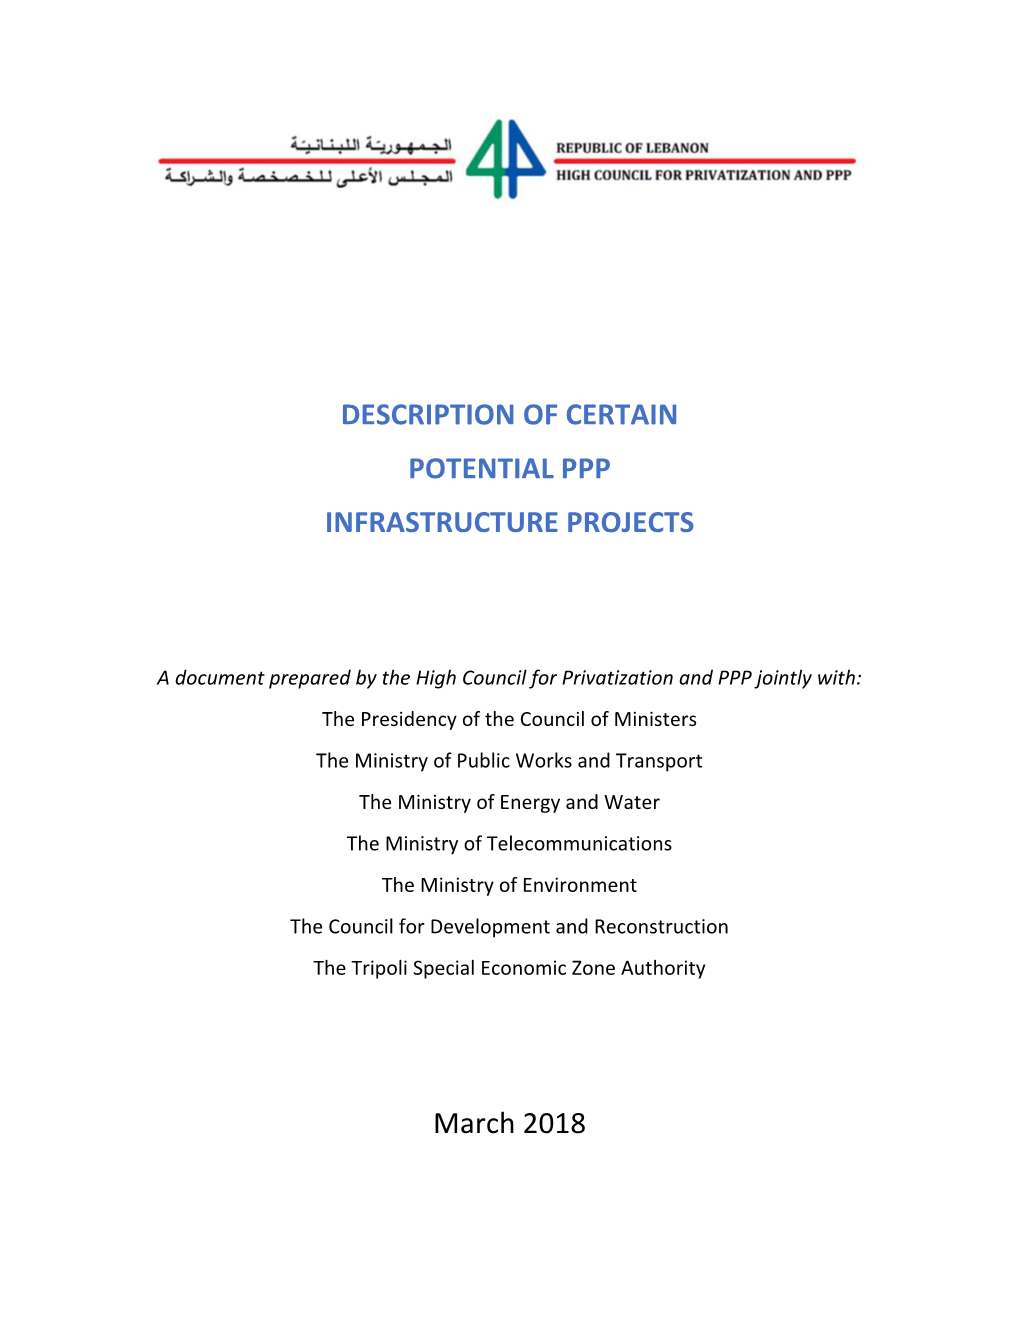 Description of Certain Potential Ppp Infrastructure Projects